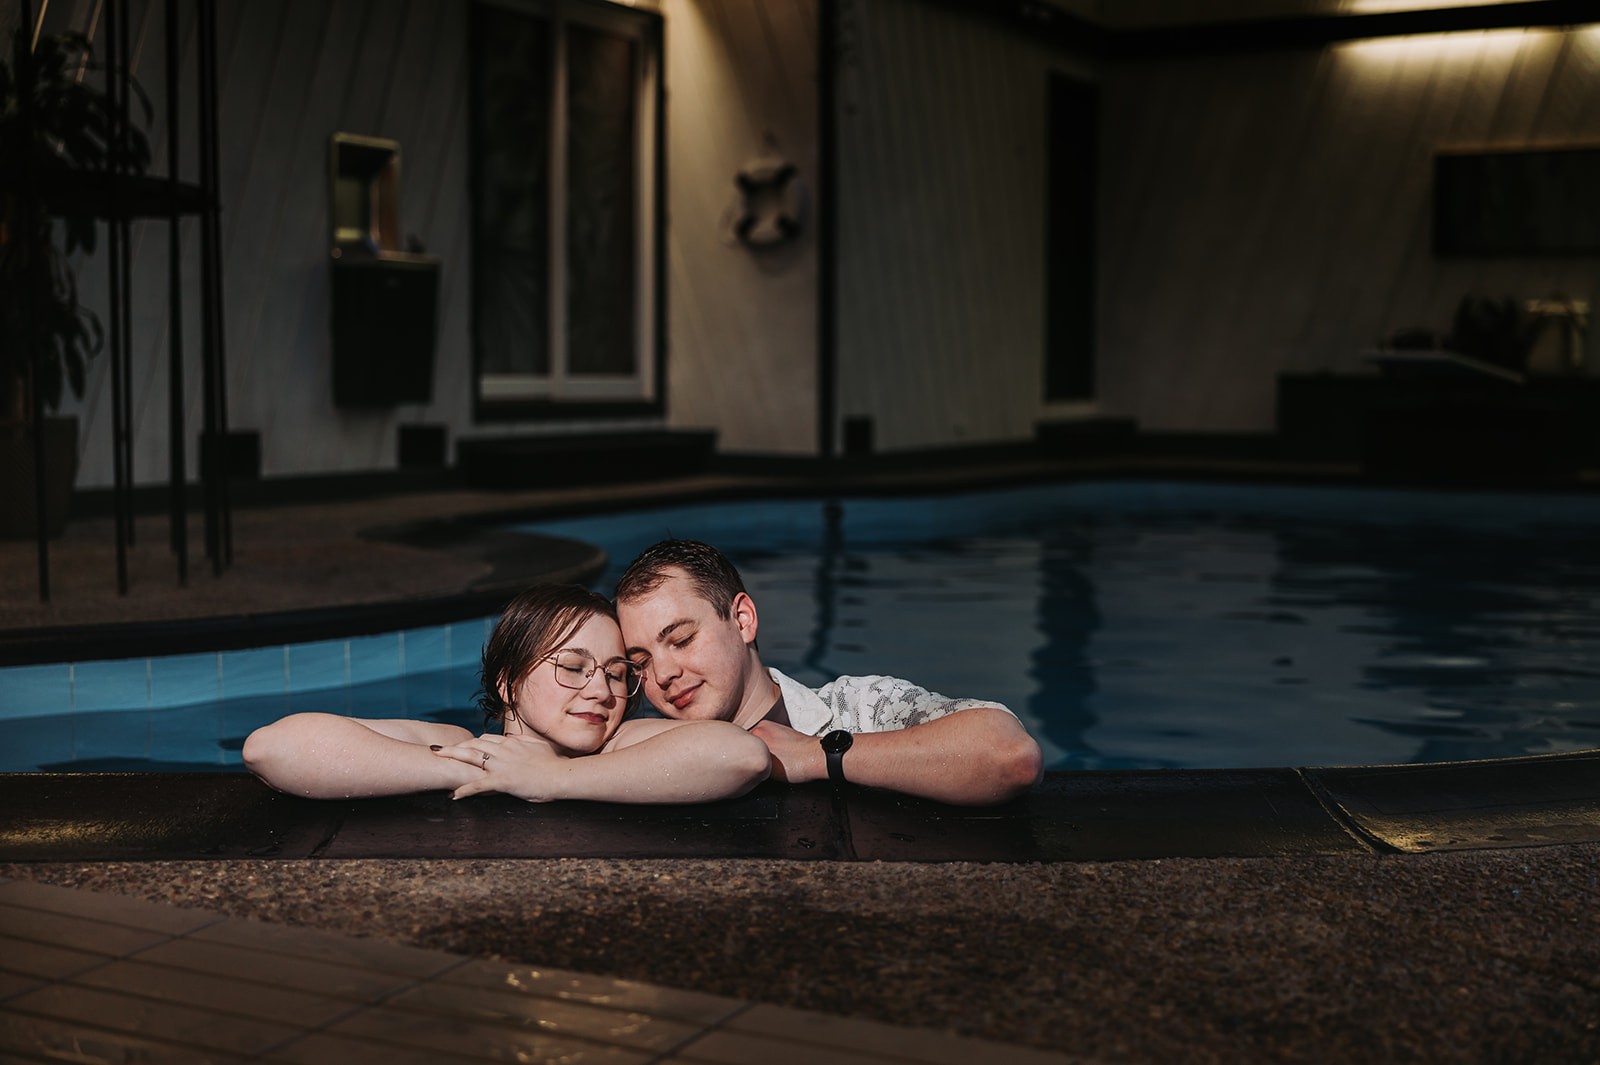  classic nighttime couples photos at a pool in minneapolis